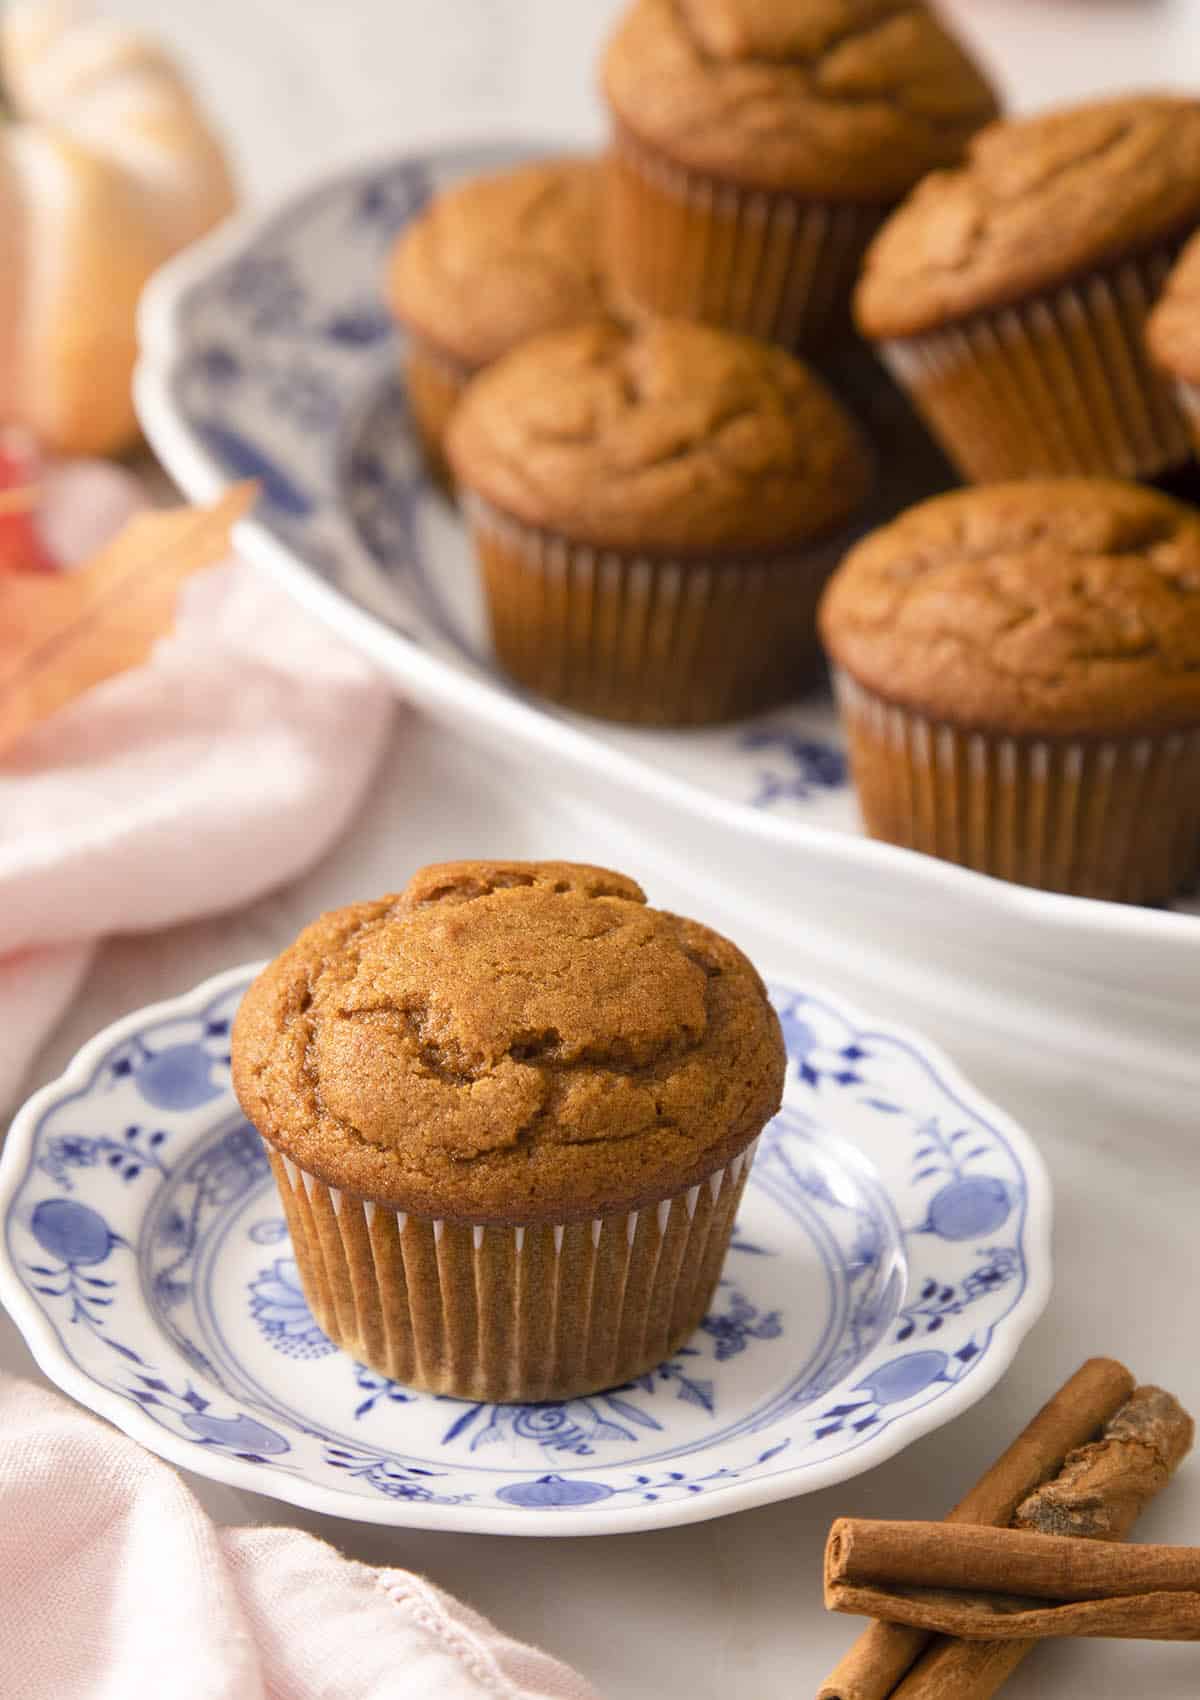 A pumpkin muffin on a blue and white plate next to cinnamon sticks.